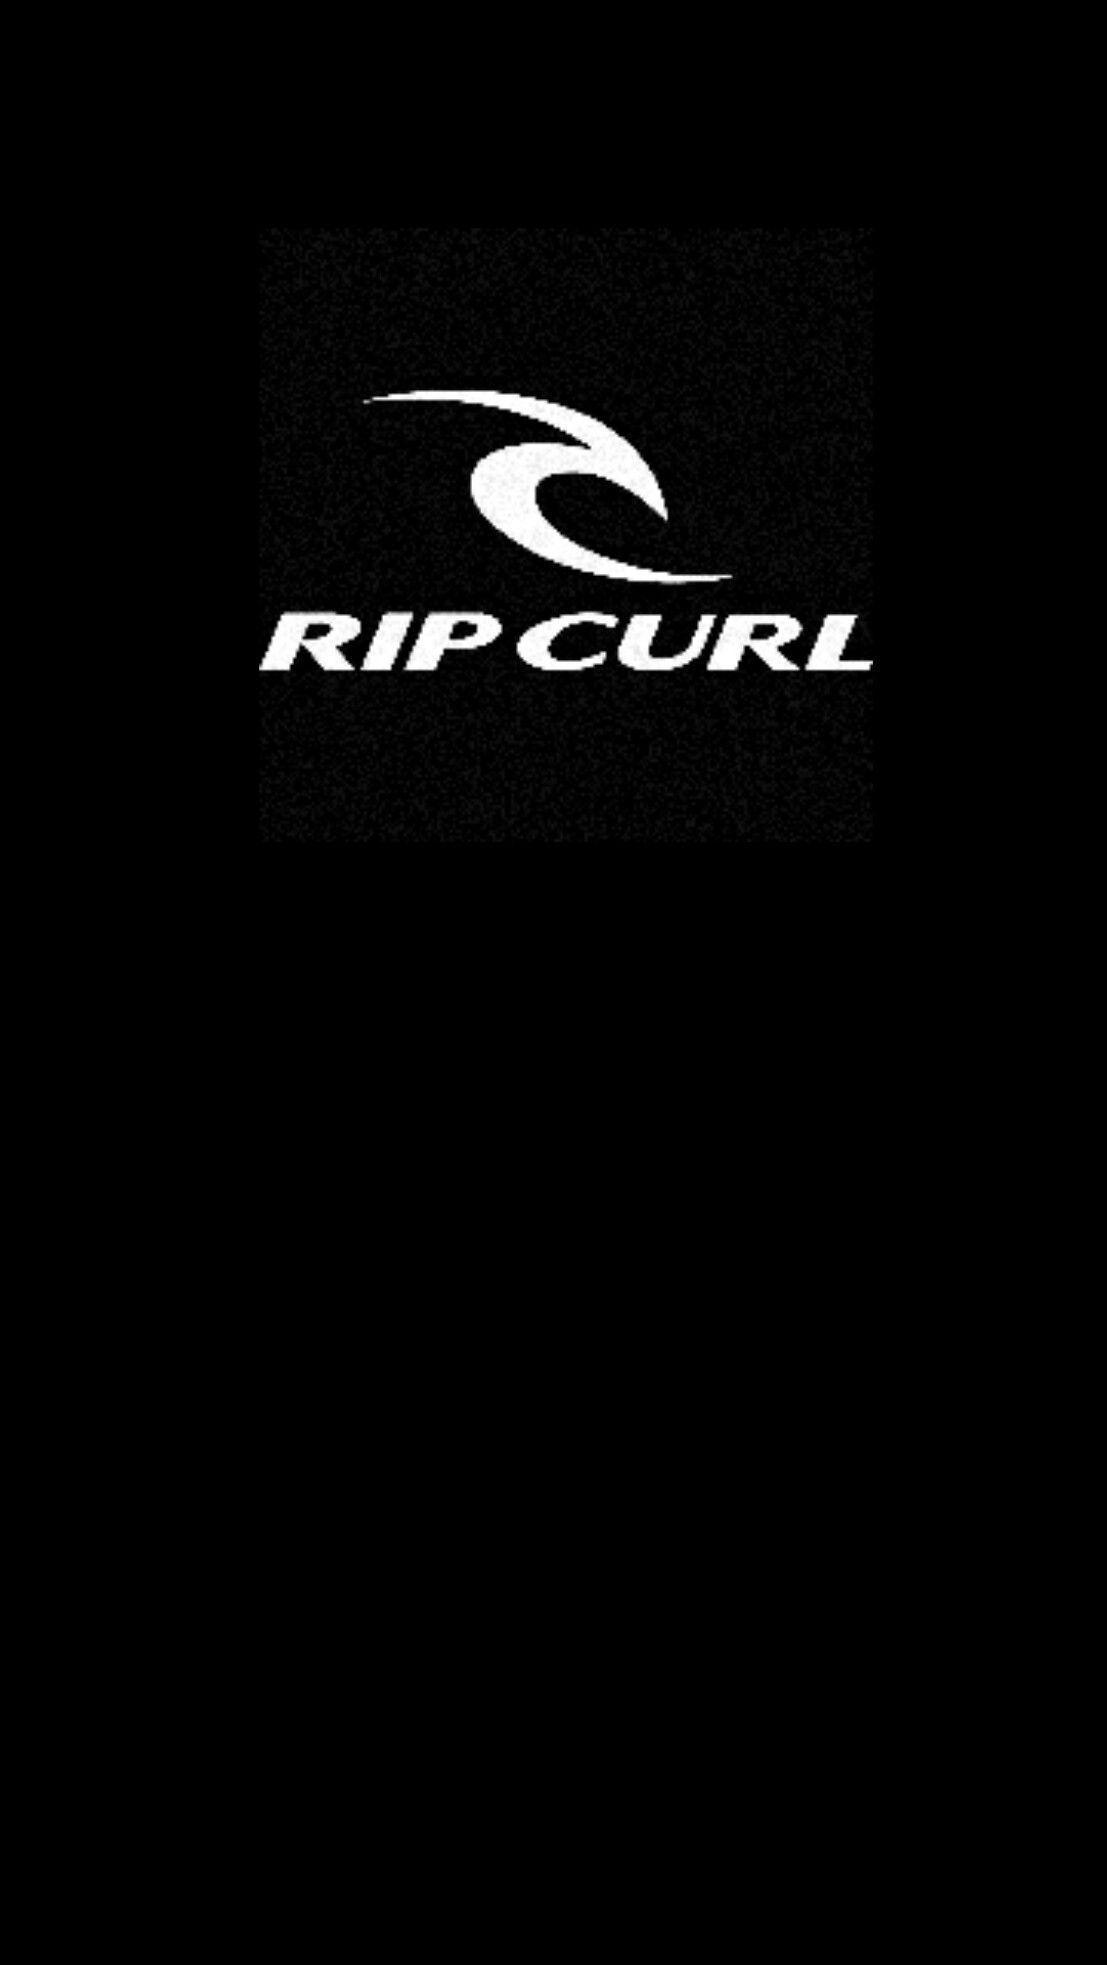 ripcurl #black #wallpaper #iPhone #android. Brand or Logo